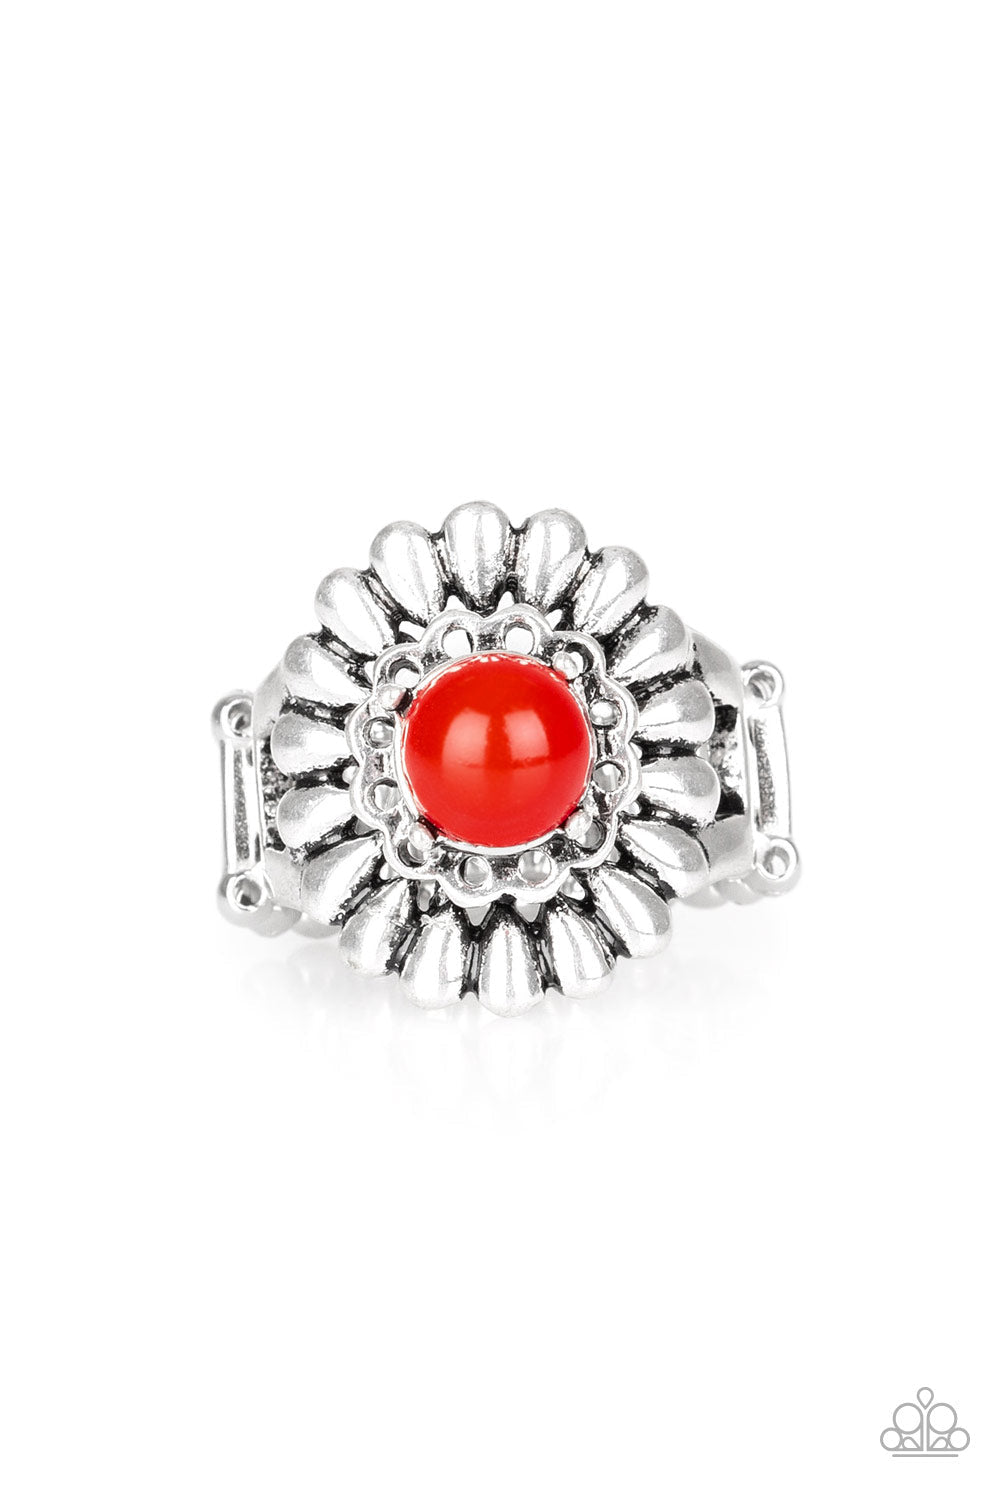 Poppy Pep - Red and Silver Fashion Ring - Paparazzi Accessories - A fiery red bead is atop a stacked floral frame, for a colorful flower fashion ring. Ring has a stretchy band for a flexible fit, typically fits ladies ring sizes 6 - 10.